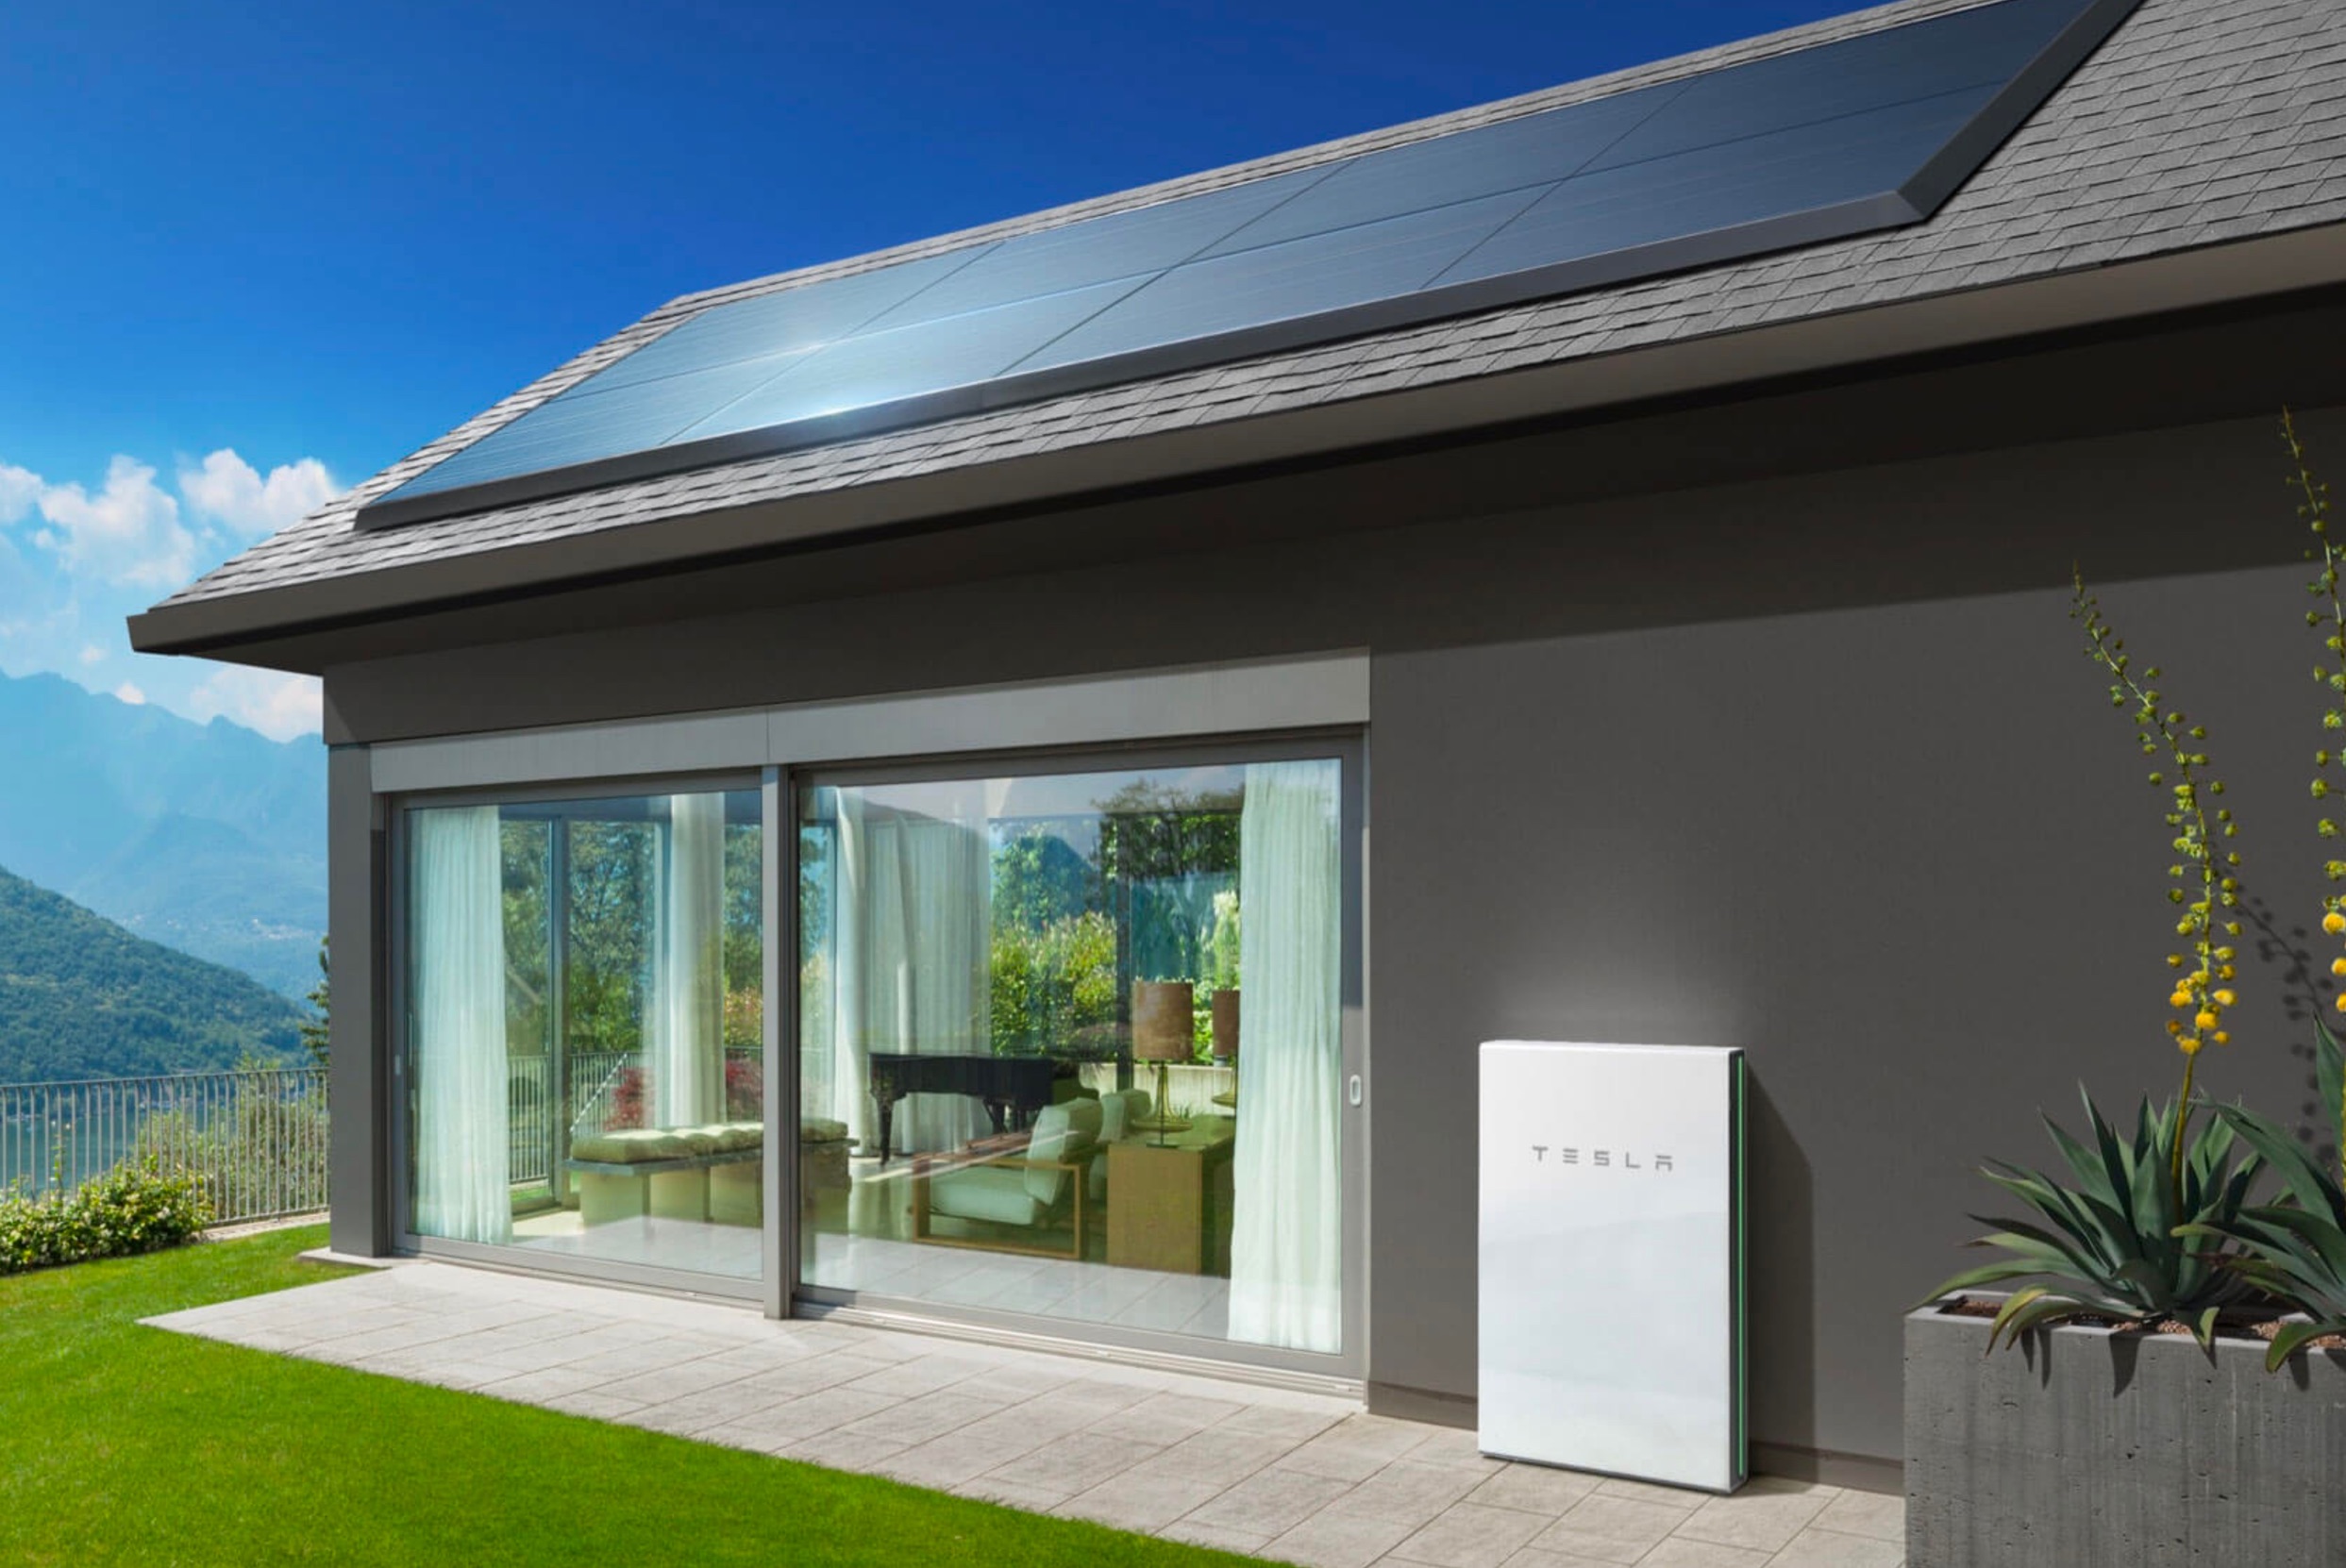 Tesla s New Low profile Solar Panels Blend Seamlessly Into A Rooftop